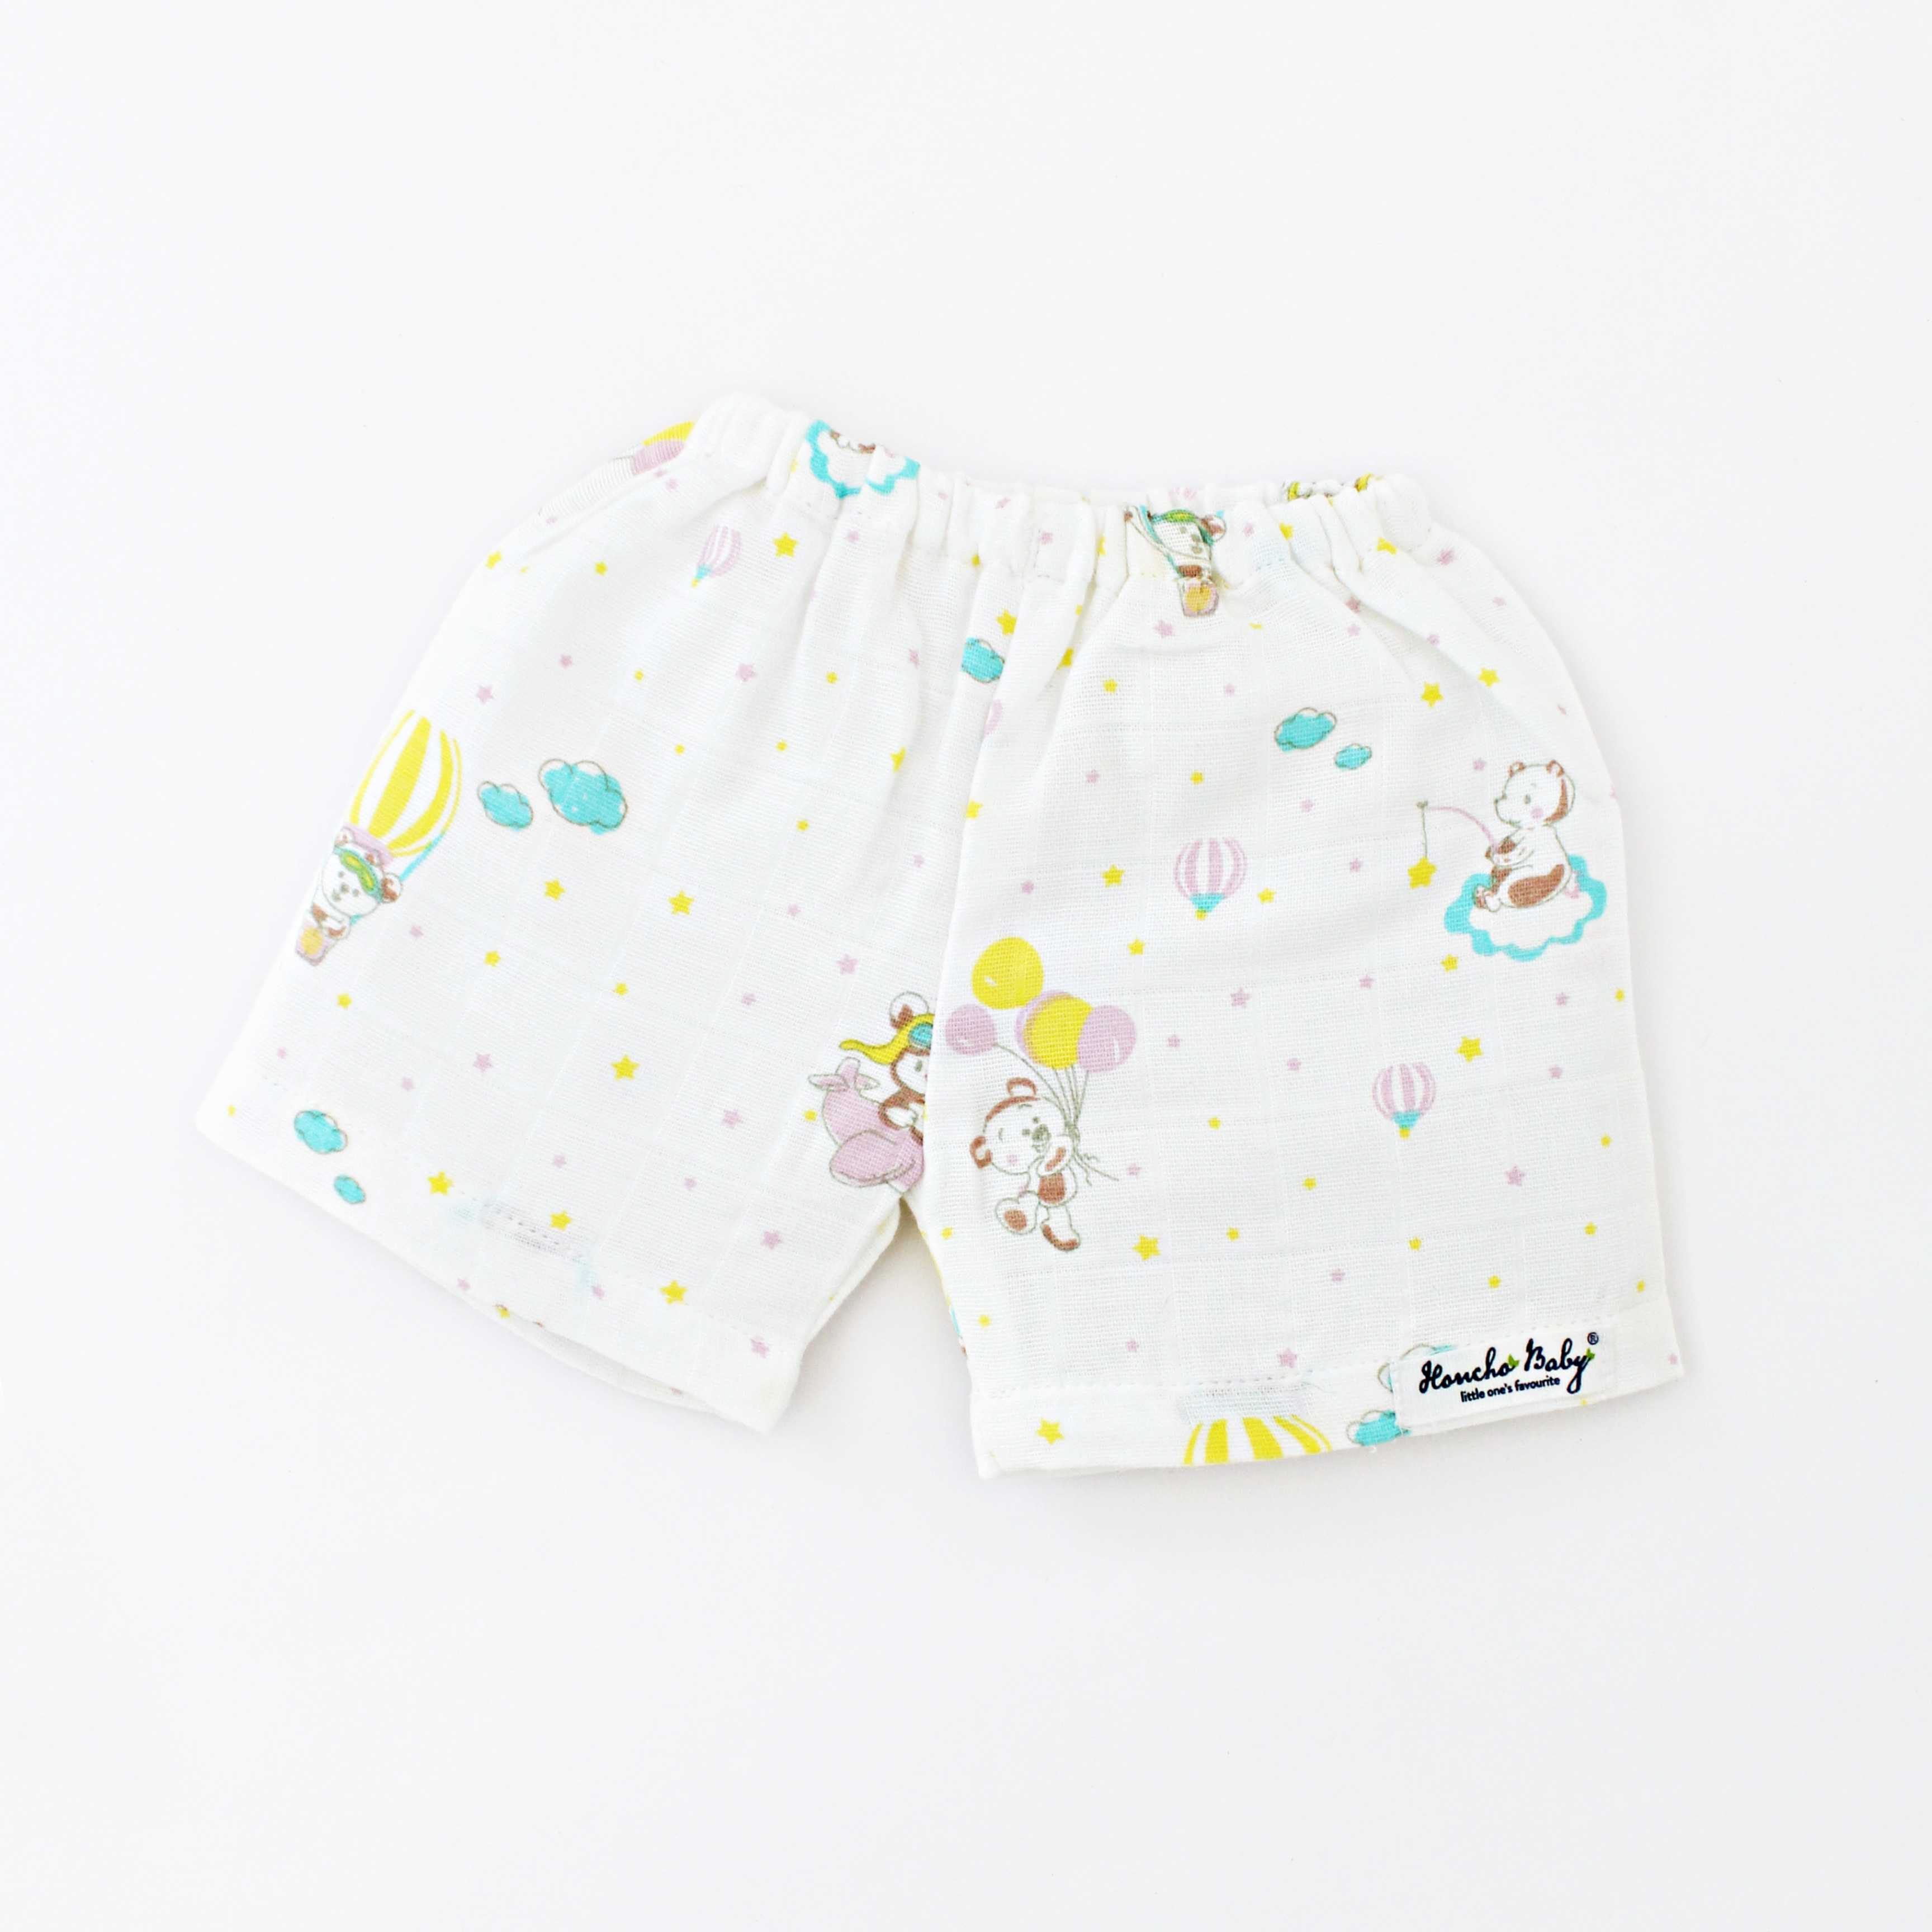 Teddy up above the Sky- Unisex Shorts - 1 Pack ( 0 to 3 years )